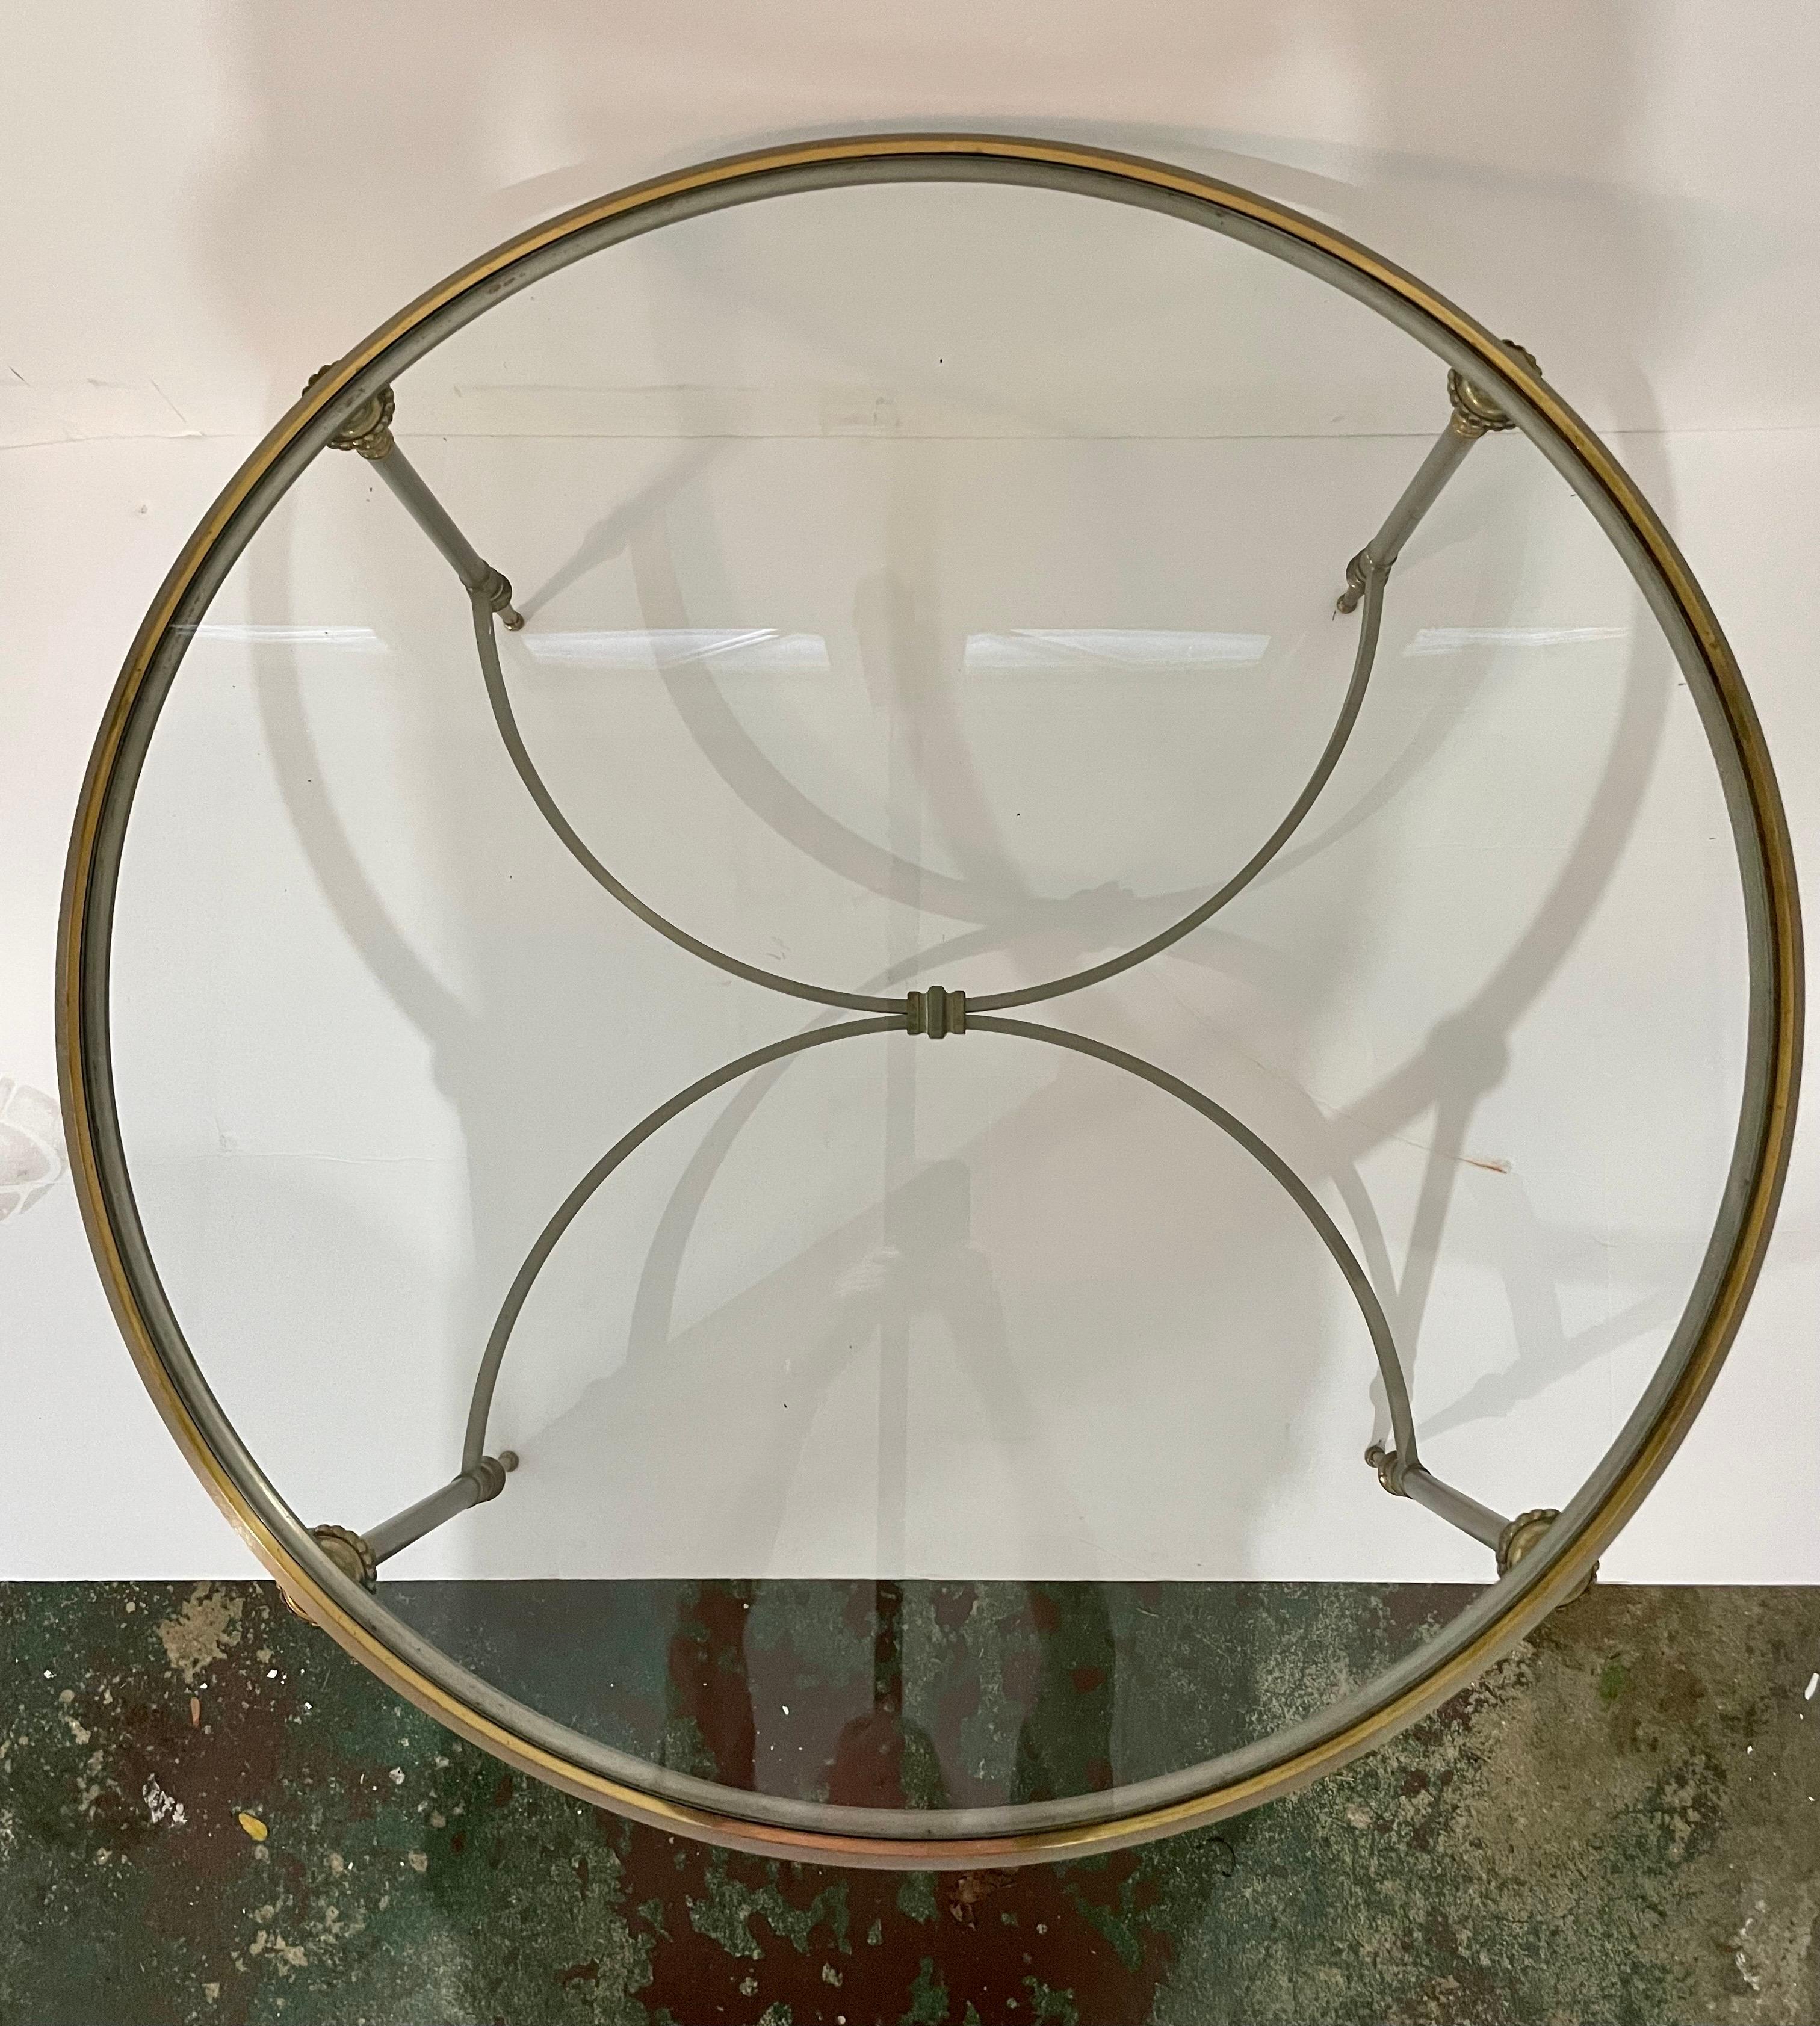 Neoclassical Revival, Maison Jansen style brushed steel and brass coffee table with inset glass top. Designed by Yale Burge. Circa 1960s. Please note of wear consistent with age including minor oxidation on the metal trim and minor scratches on the